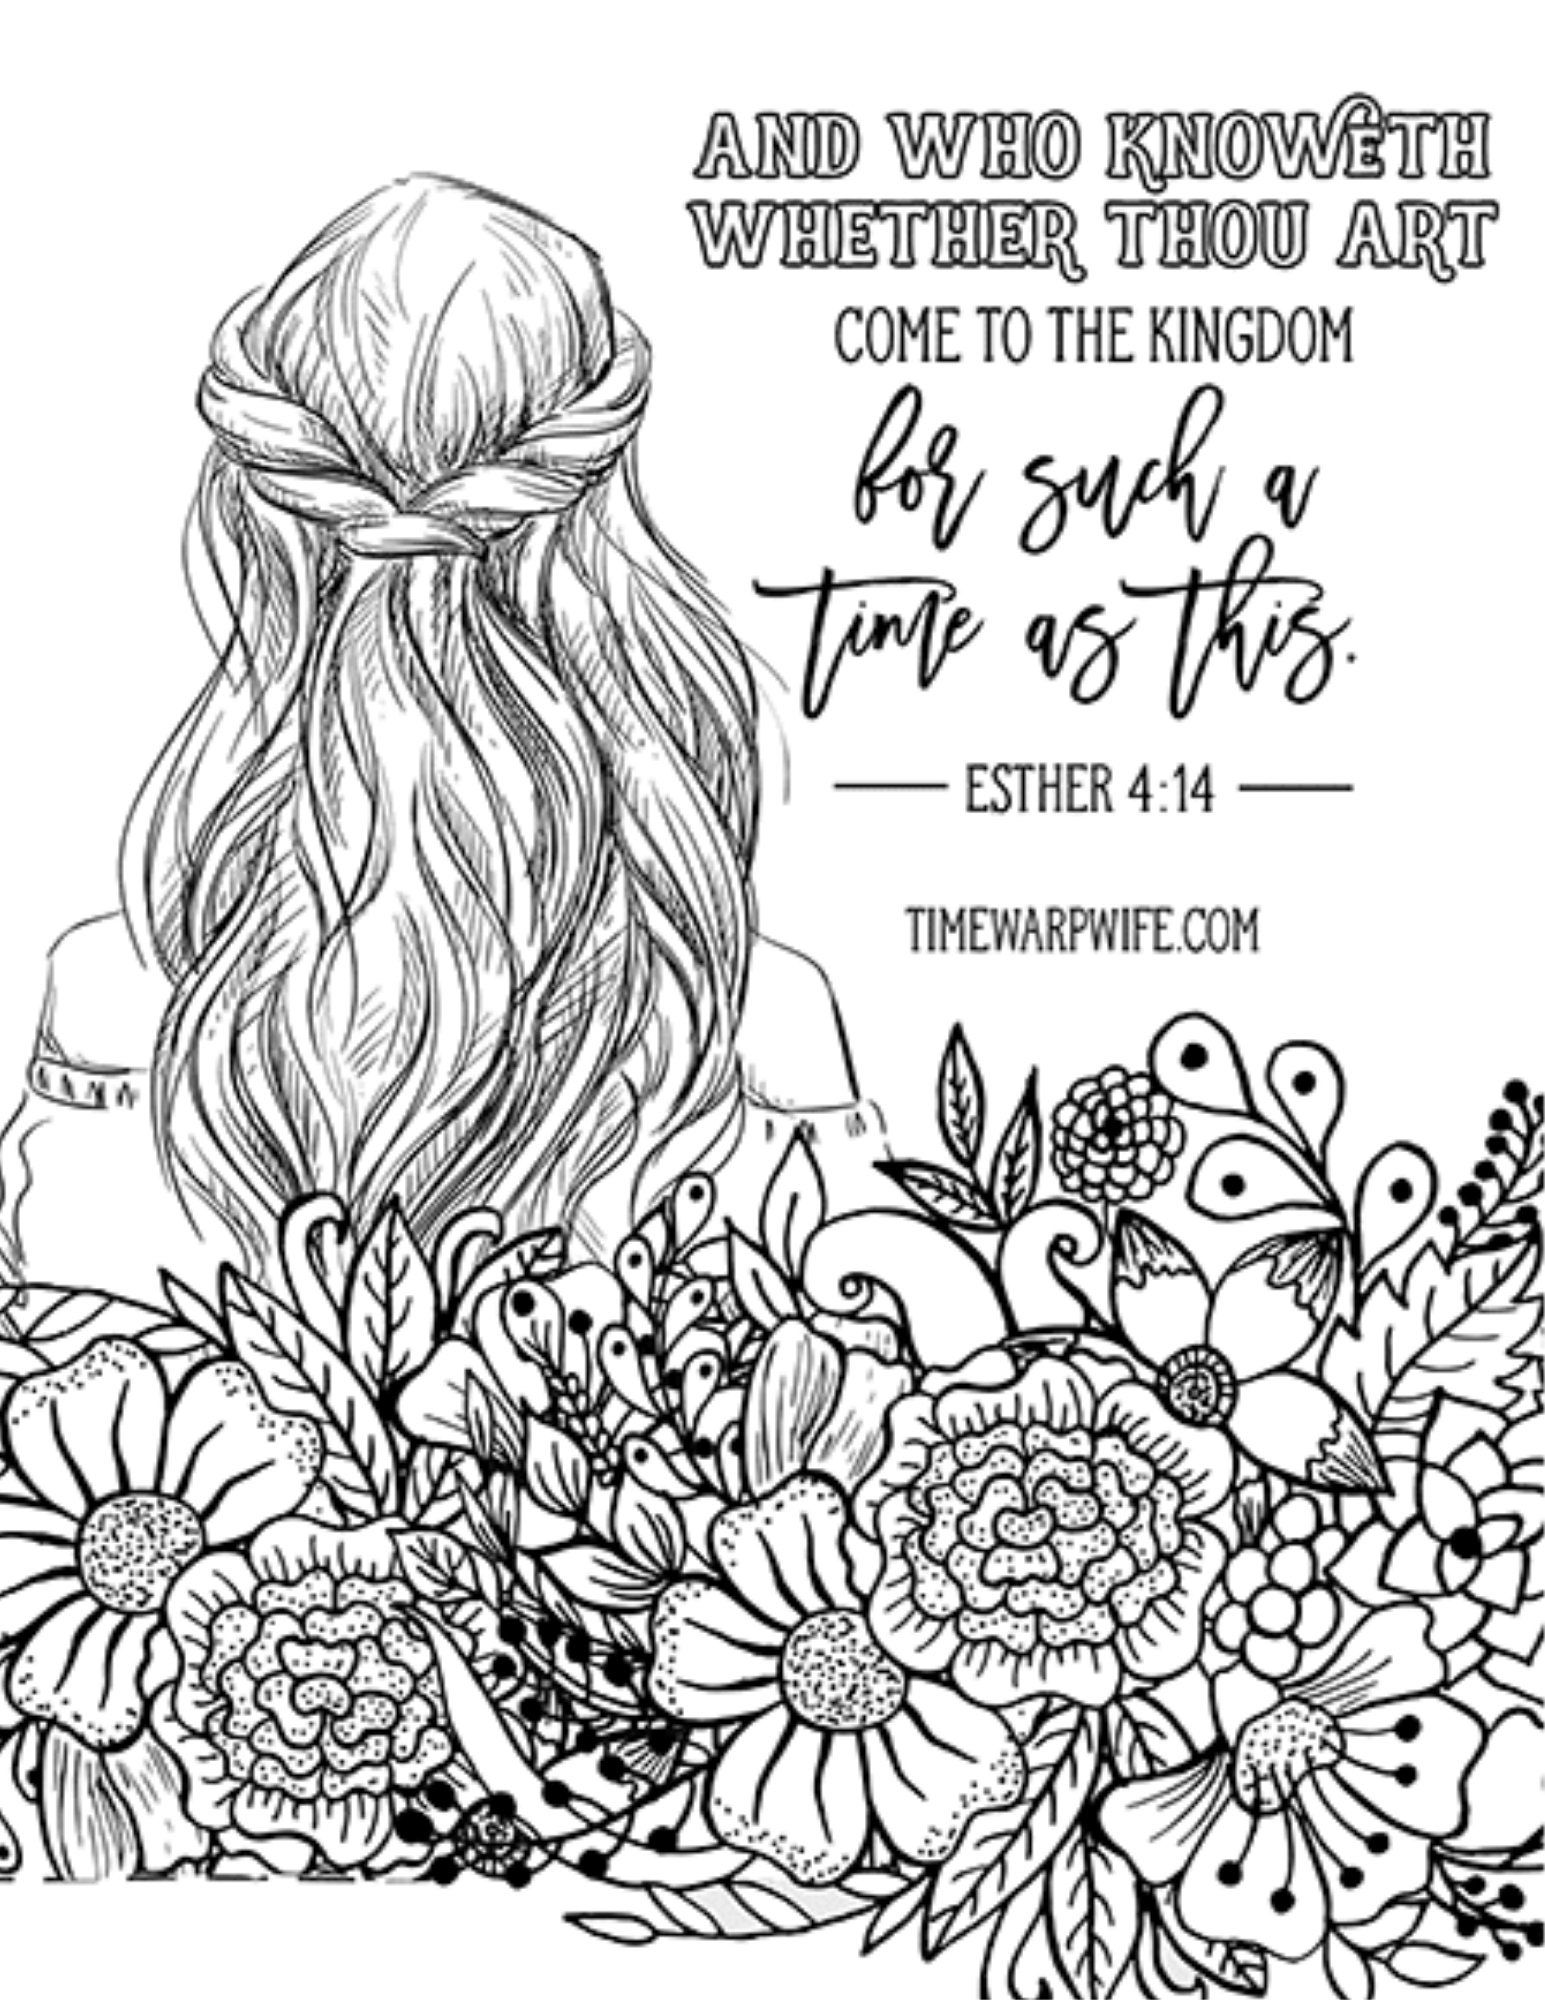 Bible Verses Coloring Book For Girls: 35 Coloring Pages of Inspirational &  Motivational Scripture wi Paperback, Independently Published, English,  9798744732288 - 가격 변동 추적 그래프 - 역대가